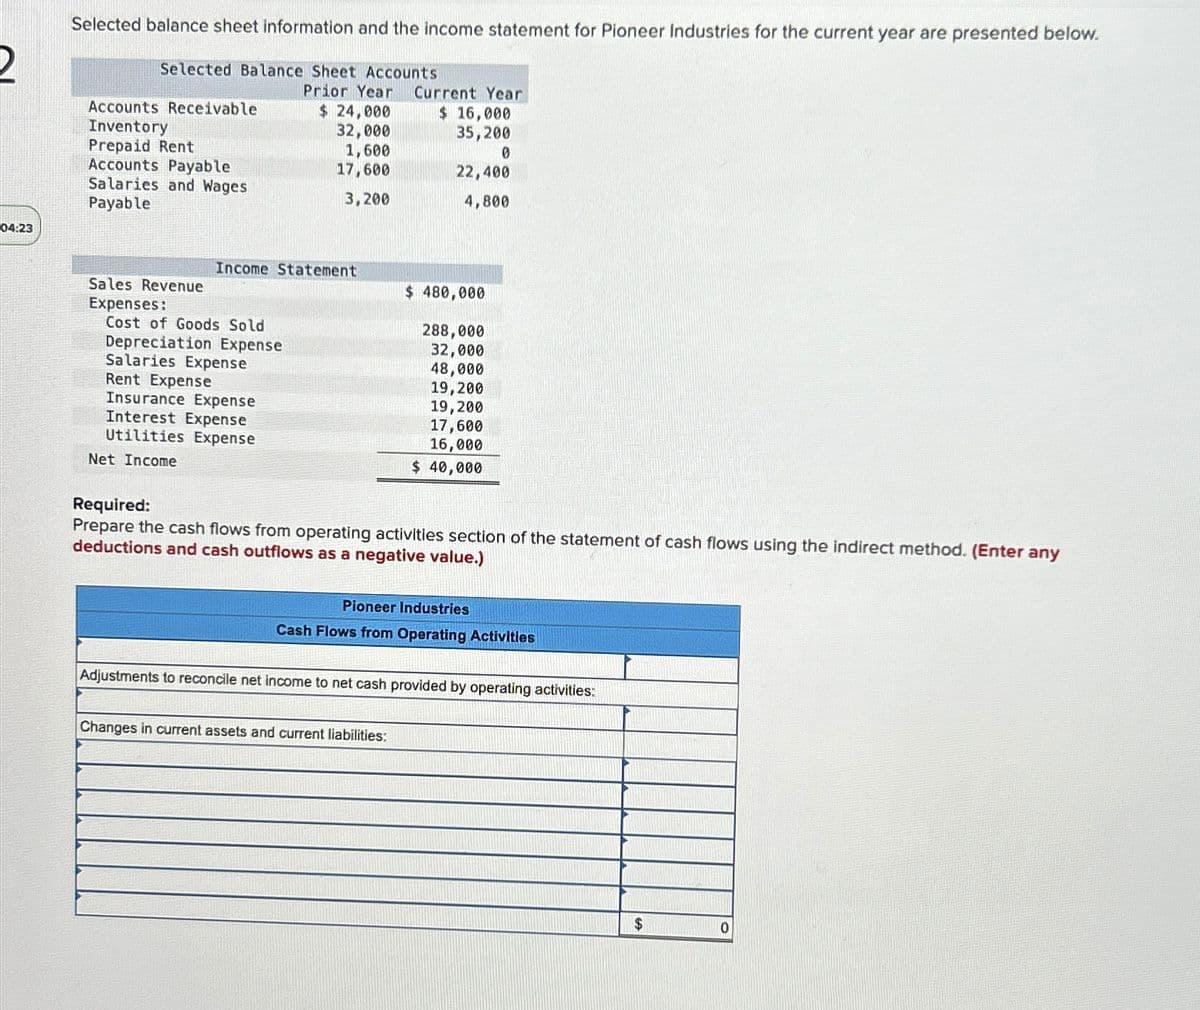 Selected balance sheet information and the income statement for Pioneer Industries for the current year are presented below.
Selected Balance Sheet Accounts
Accounts Receivable
Prior Year
Current Year
$ 24,000
$ 16,000
Inventory
32,000
35,200
Prepaid Rent
1,600
0
Accounts Payable
17,600
22,400
Salaries and Wages
3,200
4,800
Payable
04:23
Depreciation Expense
Salaries Expense
Income Statement
Sales Revenue
$ 480,000
Expenses:
Cost of Goods Sold
288,000
32,000
48,000
19,200
19,200
17,600
16,000
$ 40,000
Rent Expense
Insurance Expense
Interest Expense
Utilities Expense
Net Income
Required:
Prepare the cash flows from operating activities section of the statement of cash flows using the indirect method. (Enter any
deductions and cash outflows as a negative value.)
Pioneer Industries
Cash Flows from Operating Activities
Adjustments to reconcile net income to net cash provided by operating activities:
Changes in current assets and current liabilities:
$
0